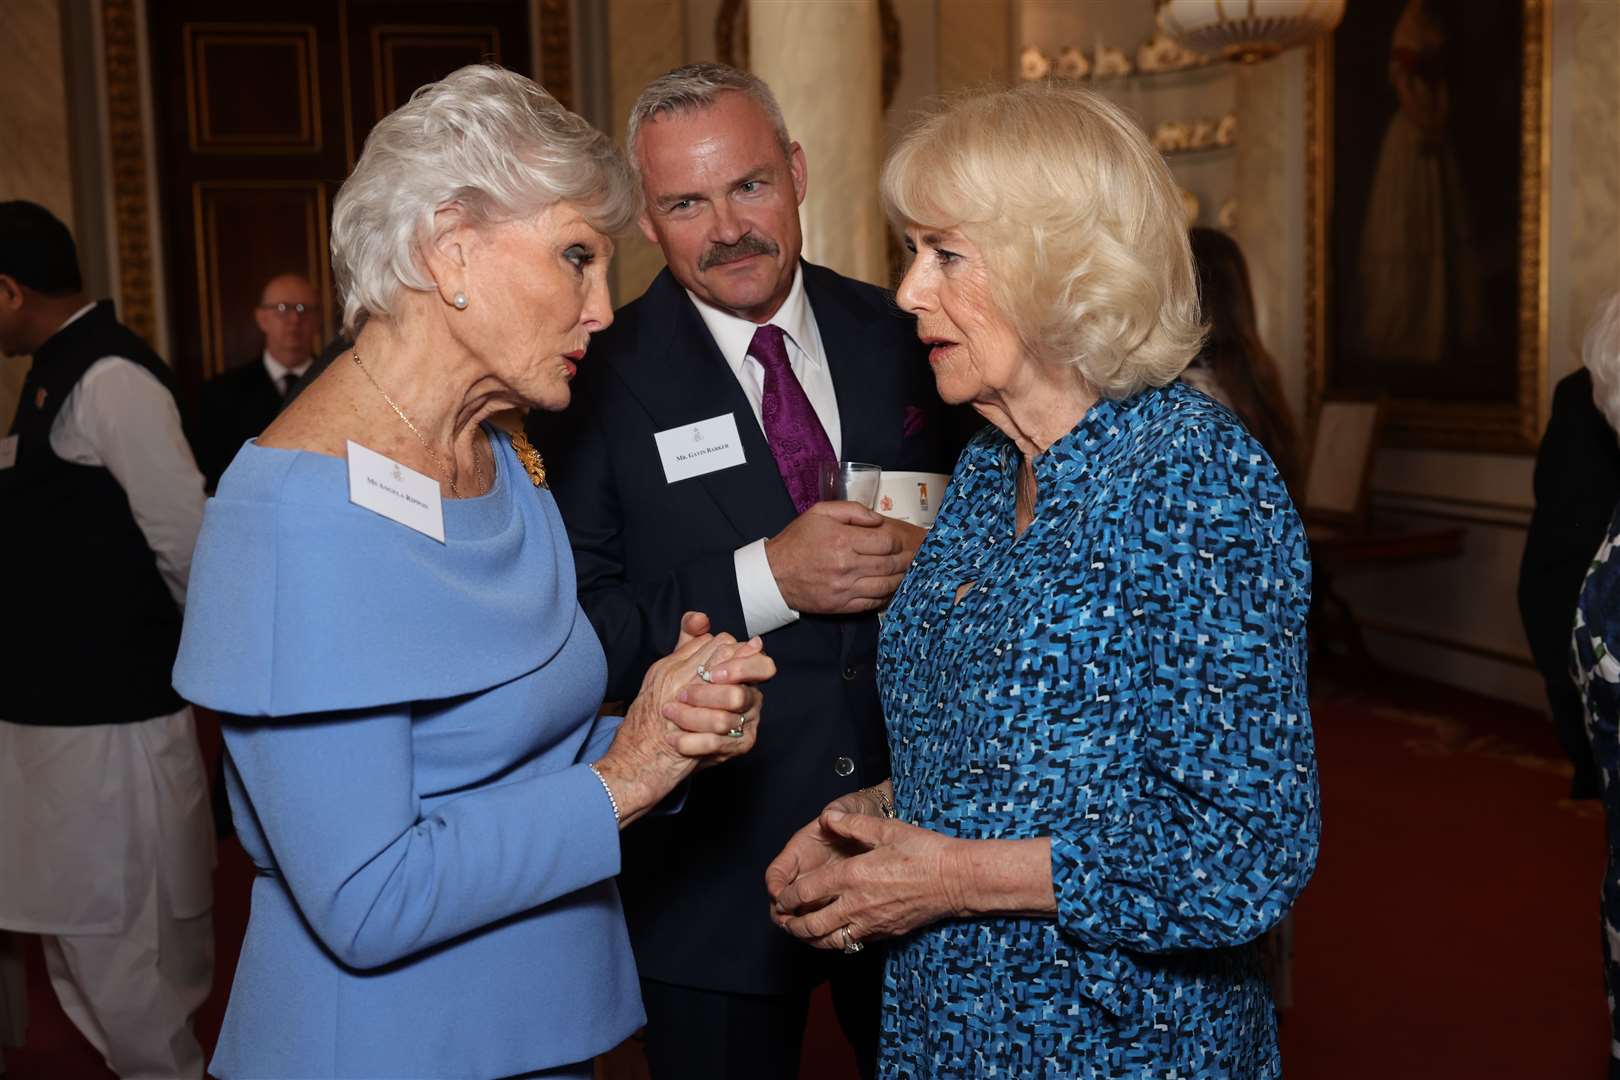 Camilla speaks to Angela Rippon during the reception at Buckingham Palace (Geoff Pugh/Daily Telegraph/PA)